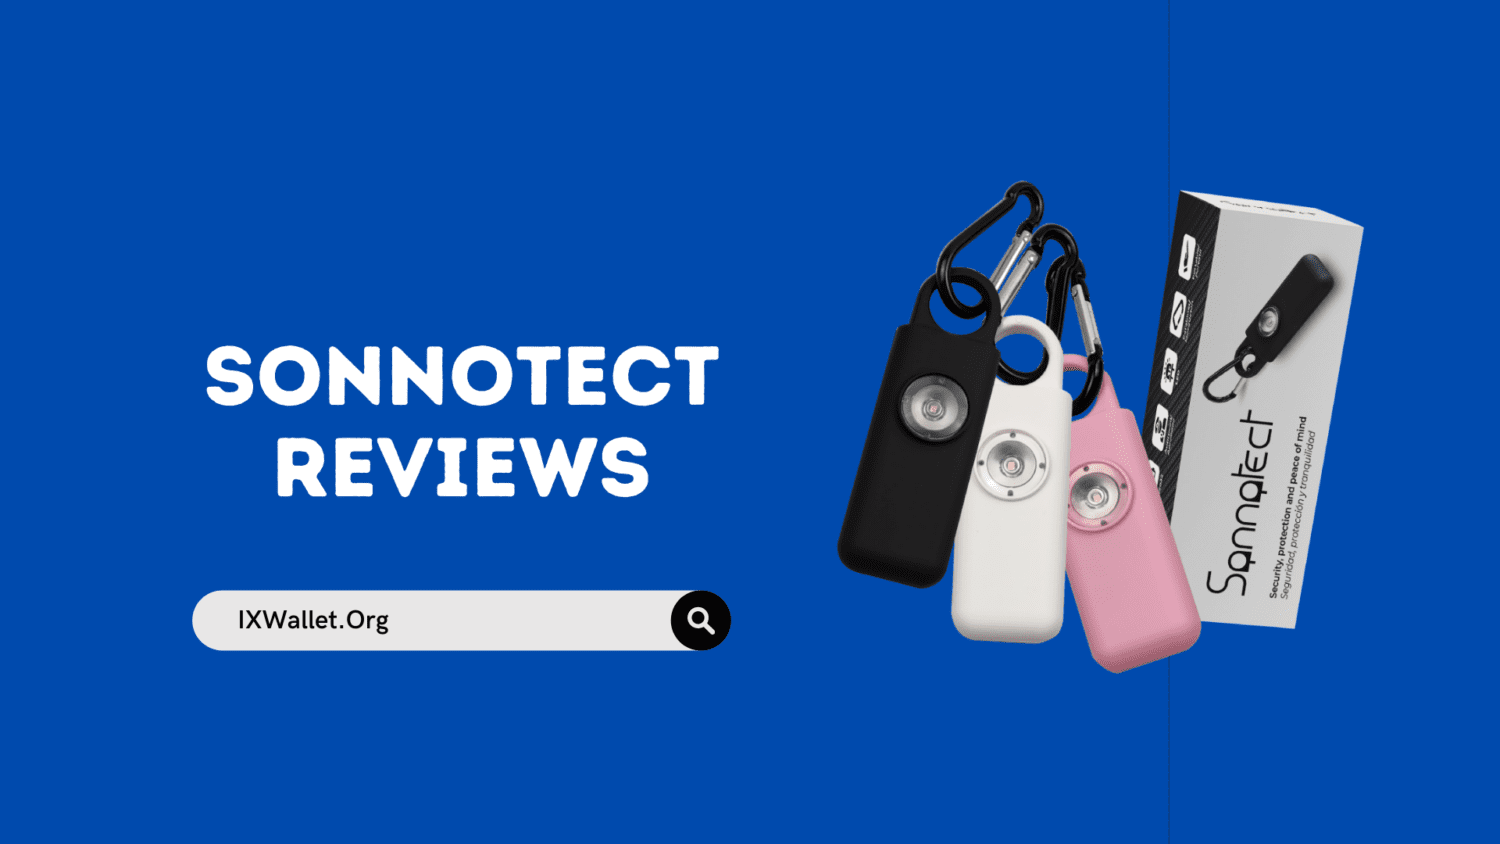 Sonnotect Reviews: Personal Safety Alarm Worth It?